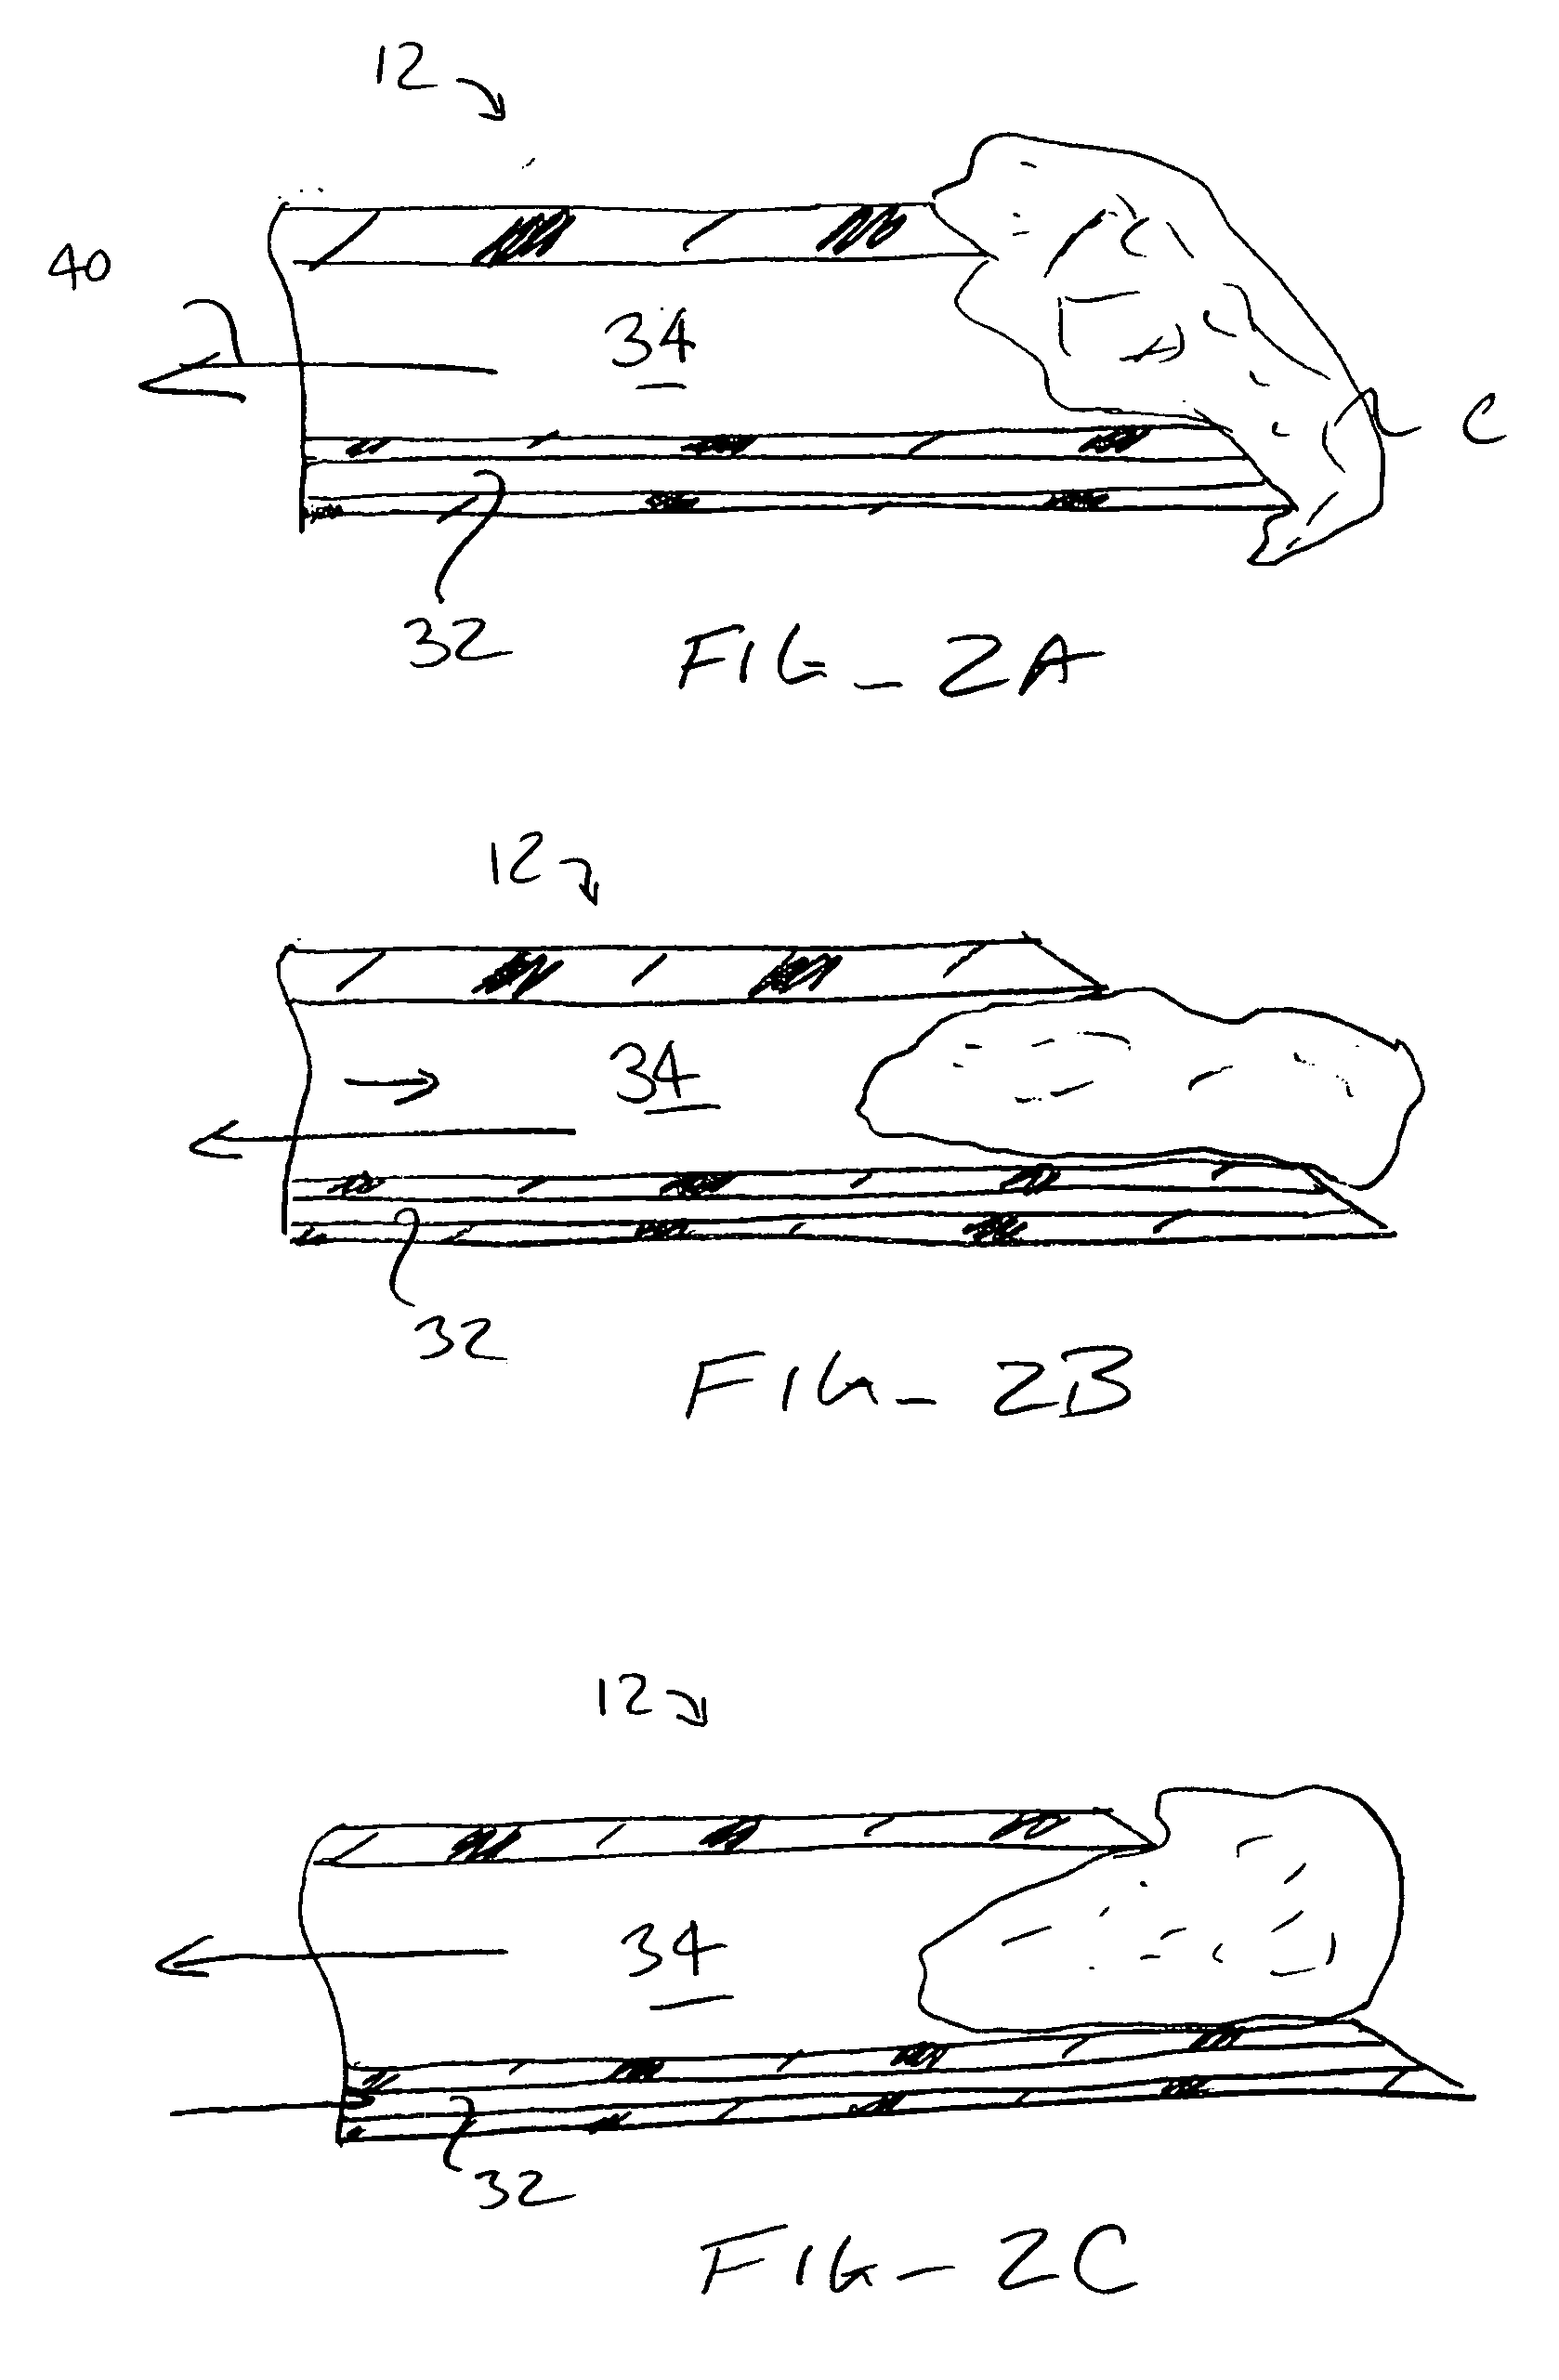 Methods and apparatus for assisted aspiration